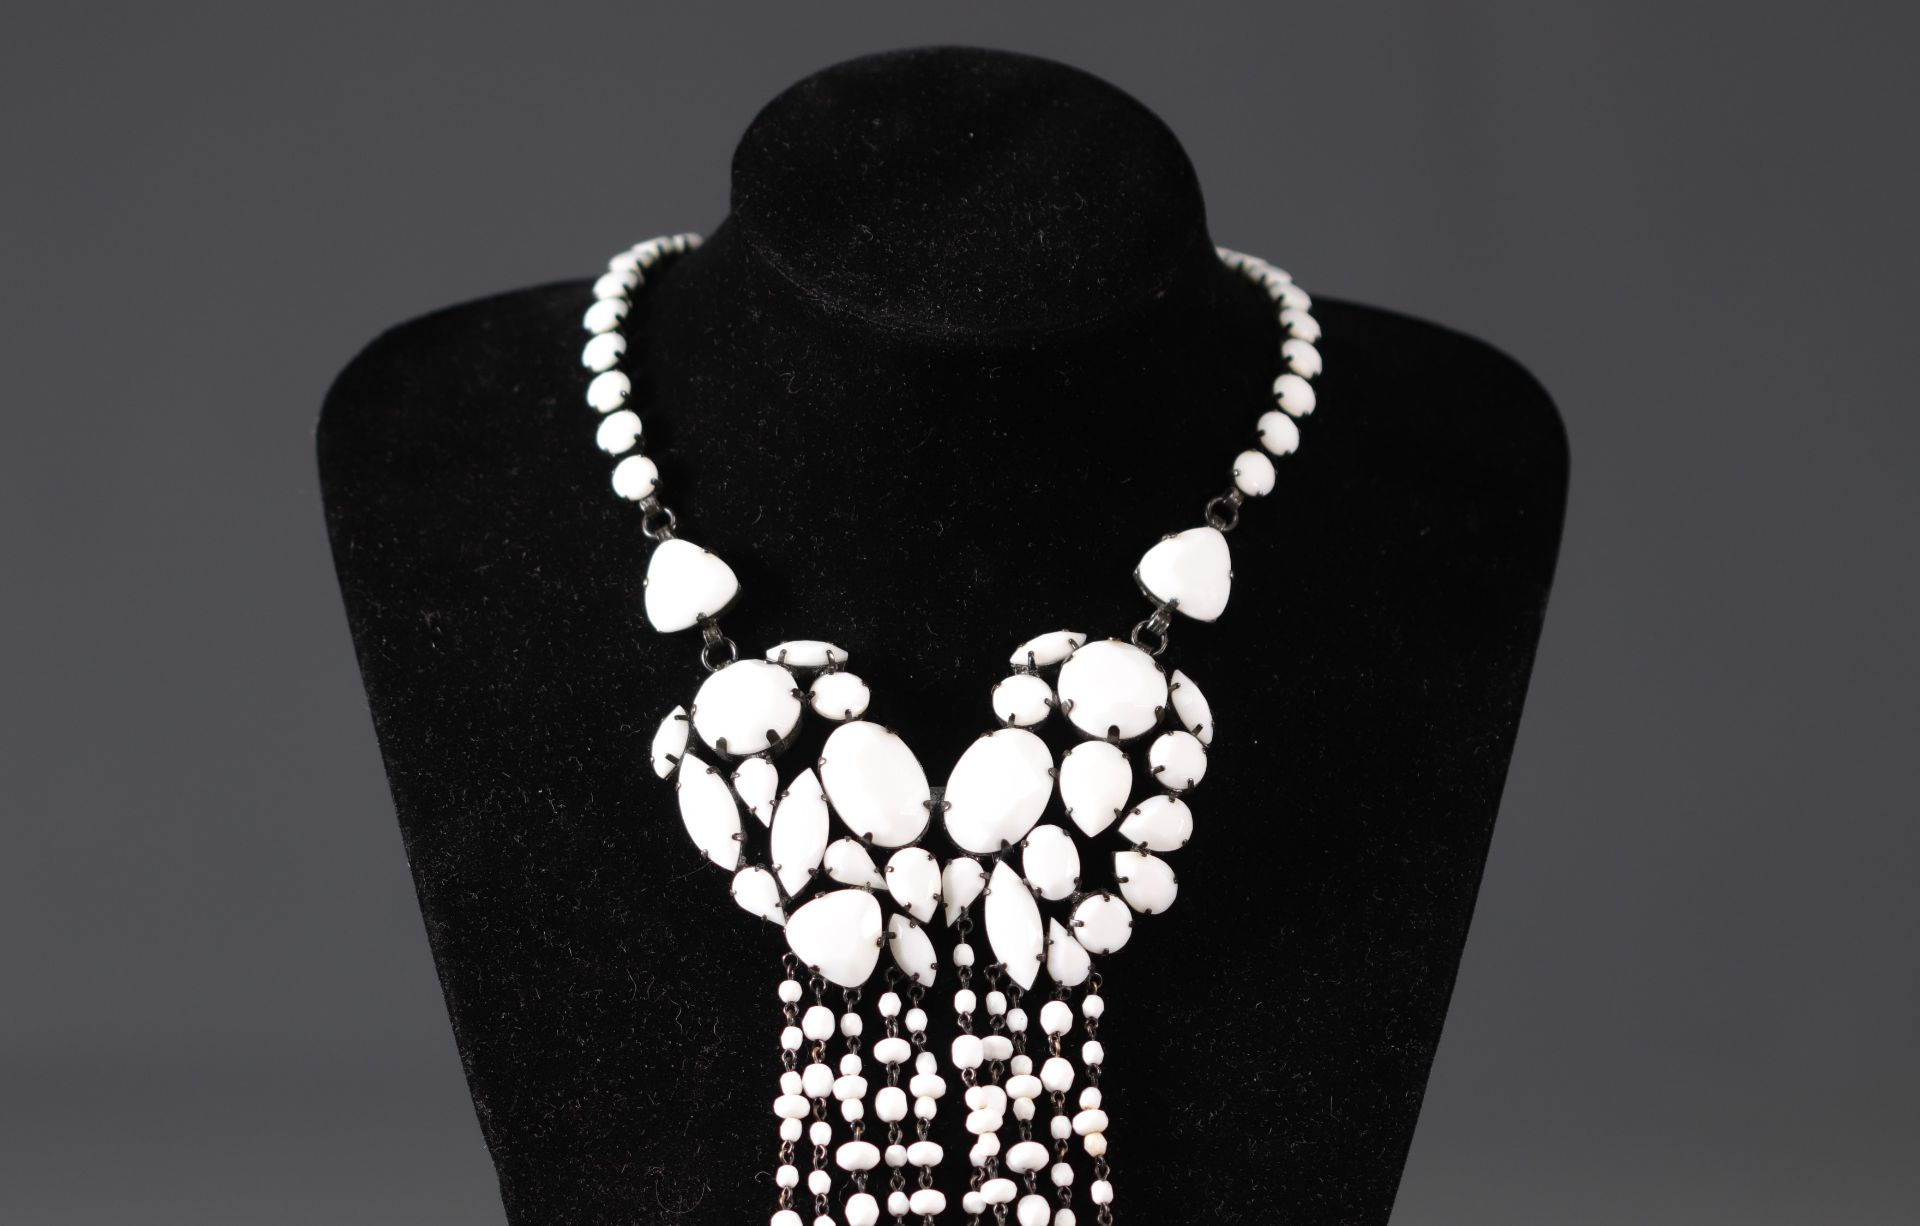 JEAN PAUL GAULTIER Necklace set with white glass paste cabochons - Image 2 of 3